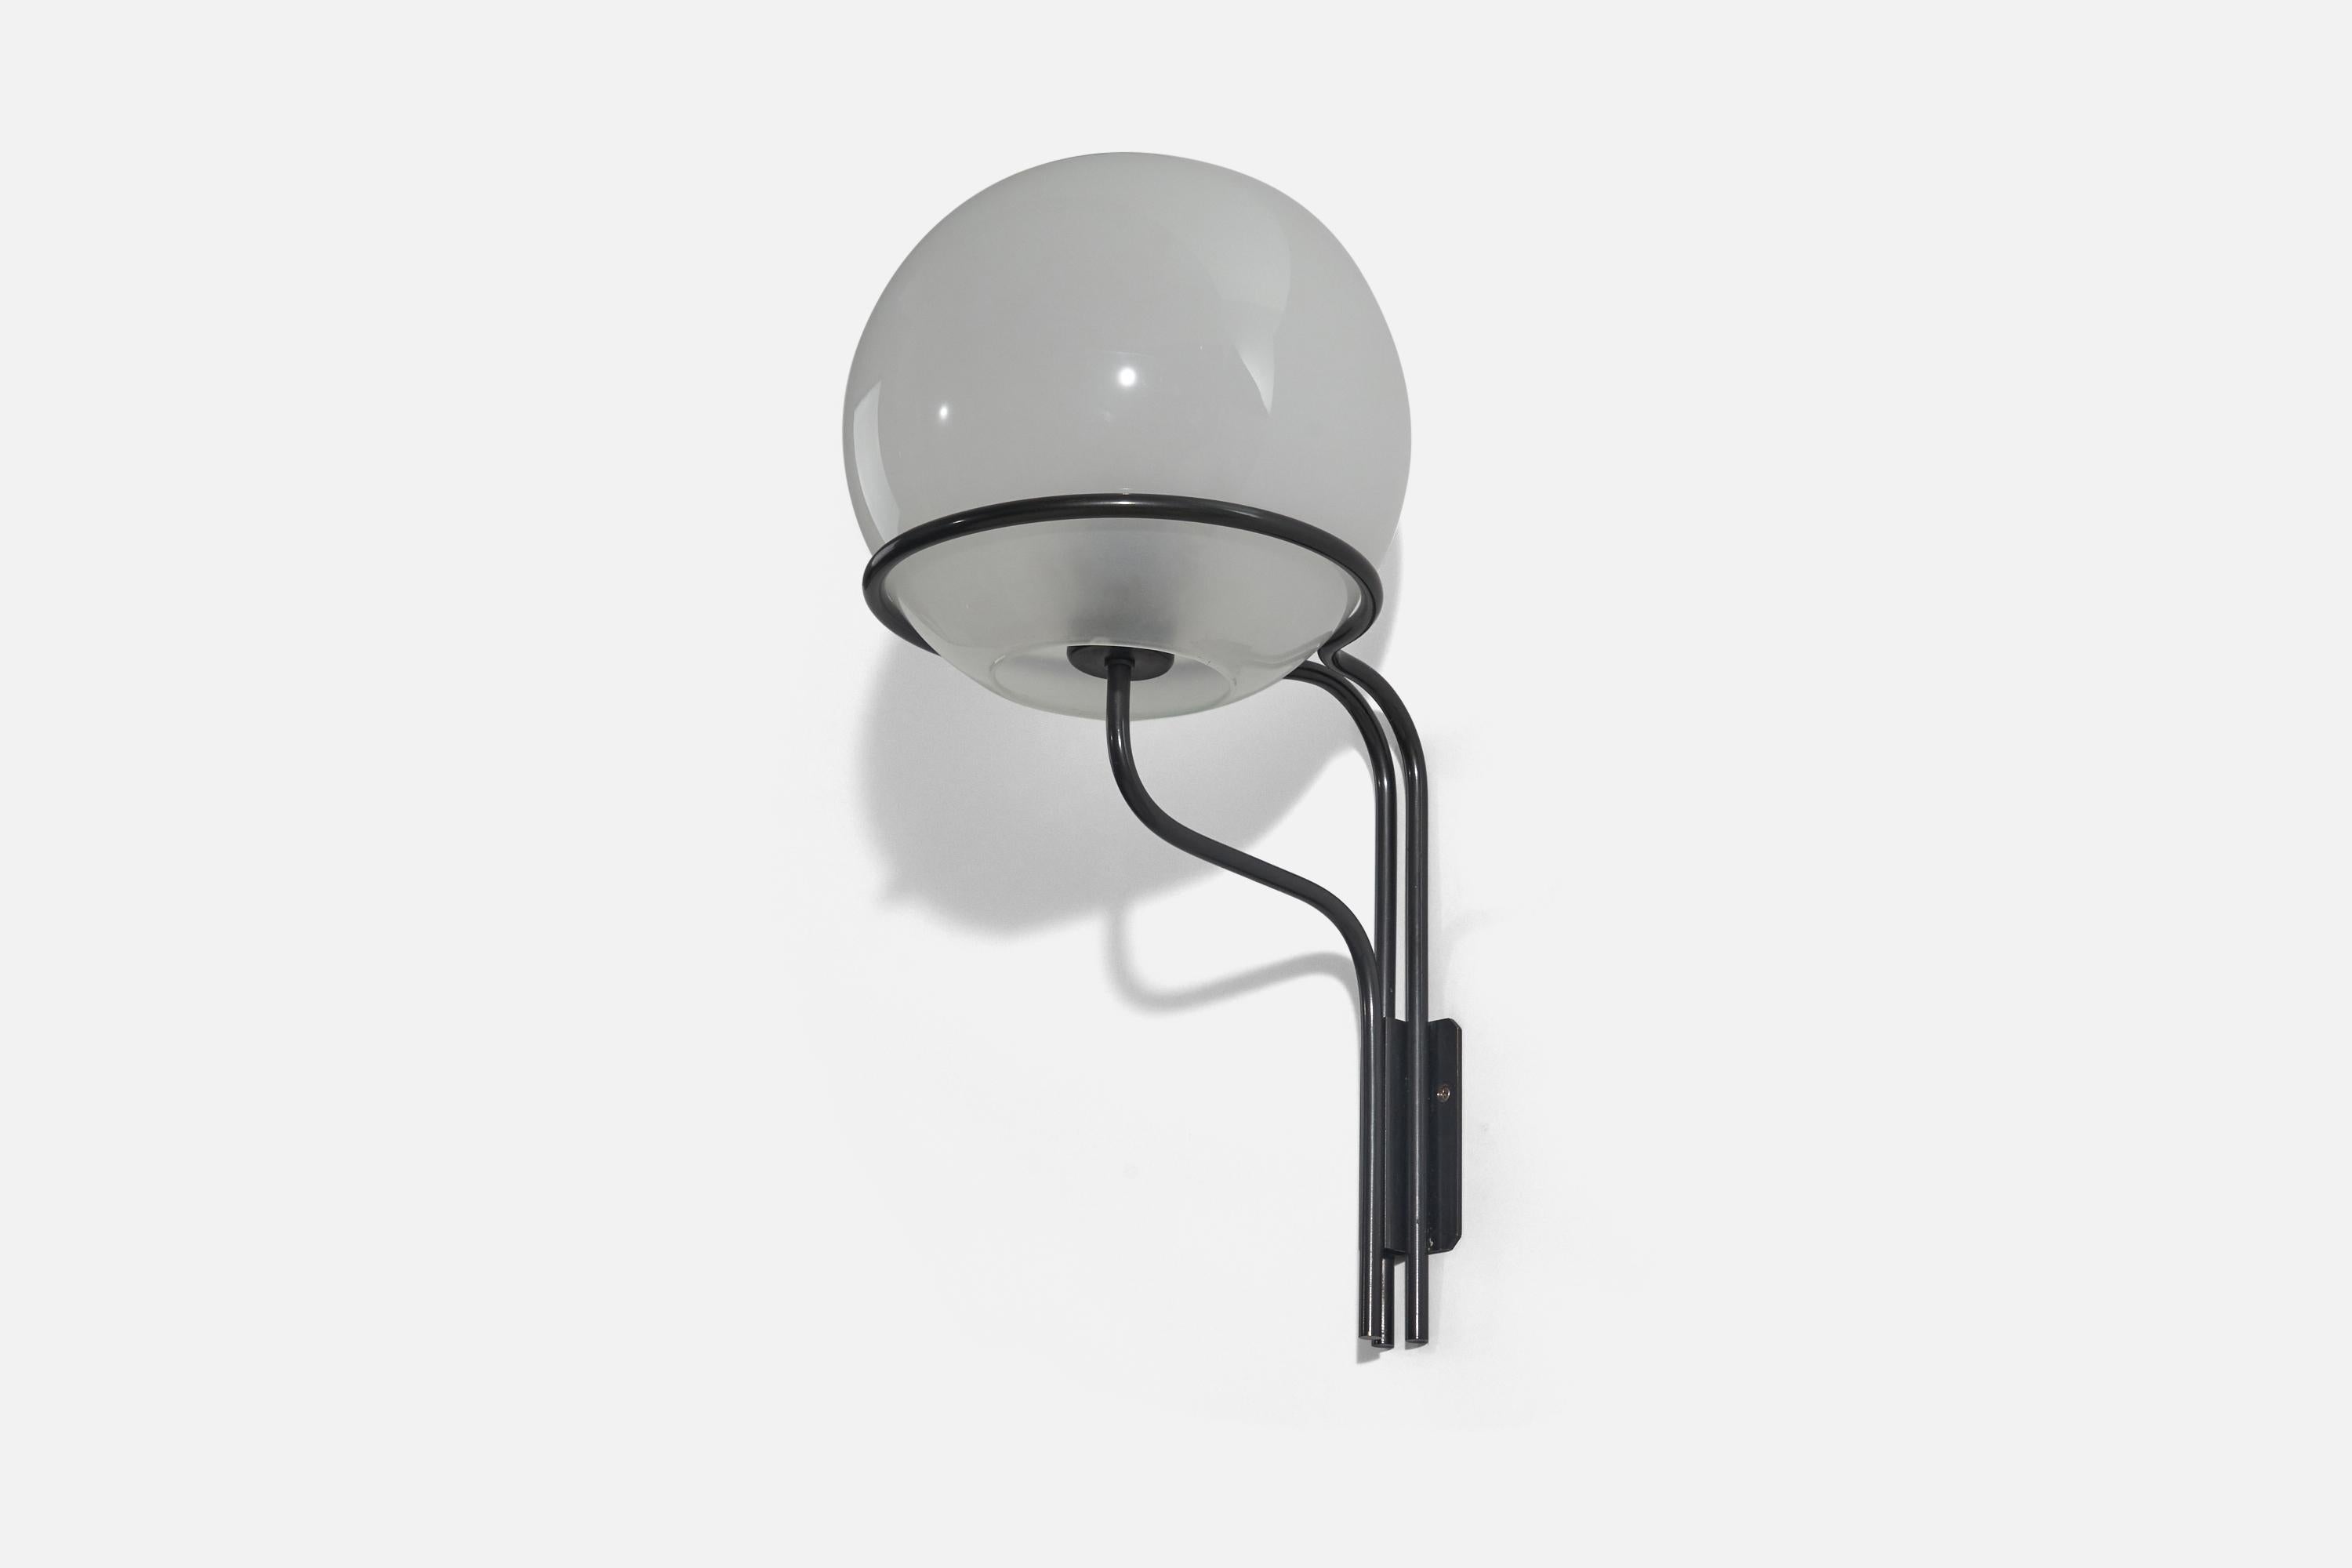 A lacquered metal and glass sconce / wall light designed by Ico Parisi and produced by Arteluce, Italy, c. 1960s.

Dimensions of back plate (inches) : 4.14 x 2.36 x 0.89 (height x width x depth).

Socket takes standard E-26 medium base